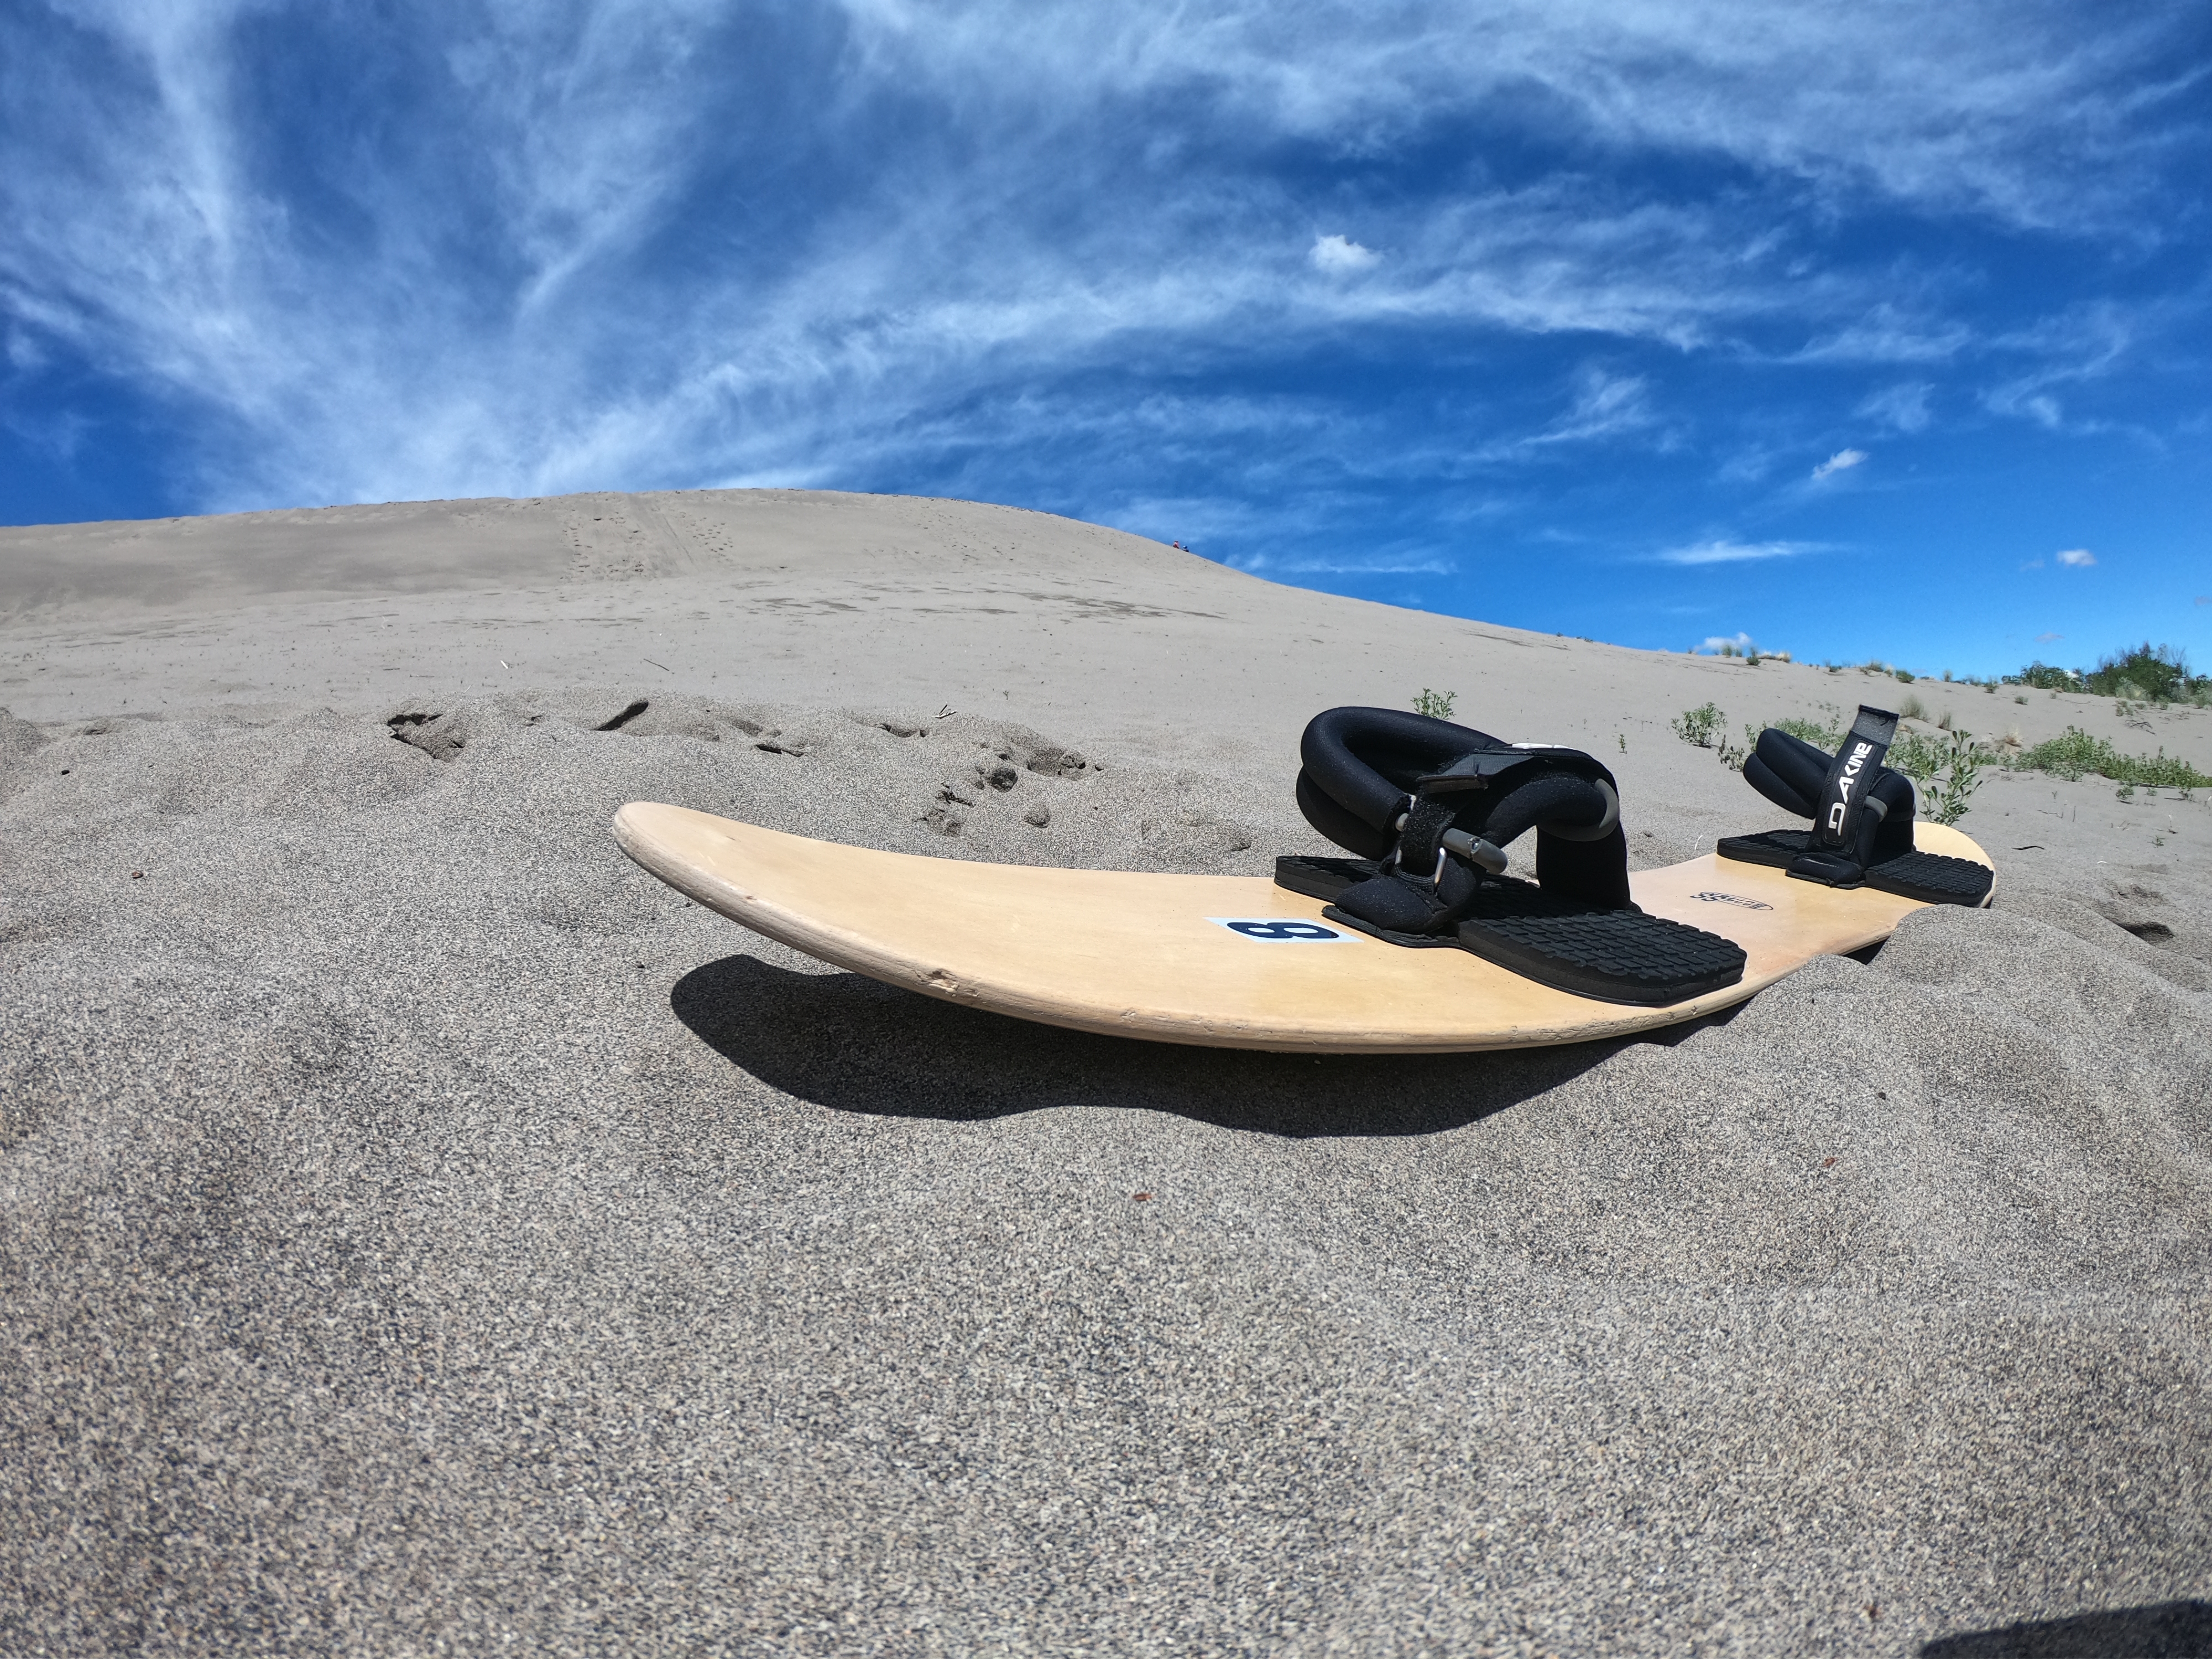 Sandboard in the sand at the Bruneau Dunes